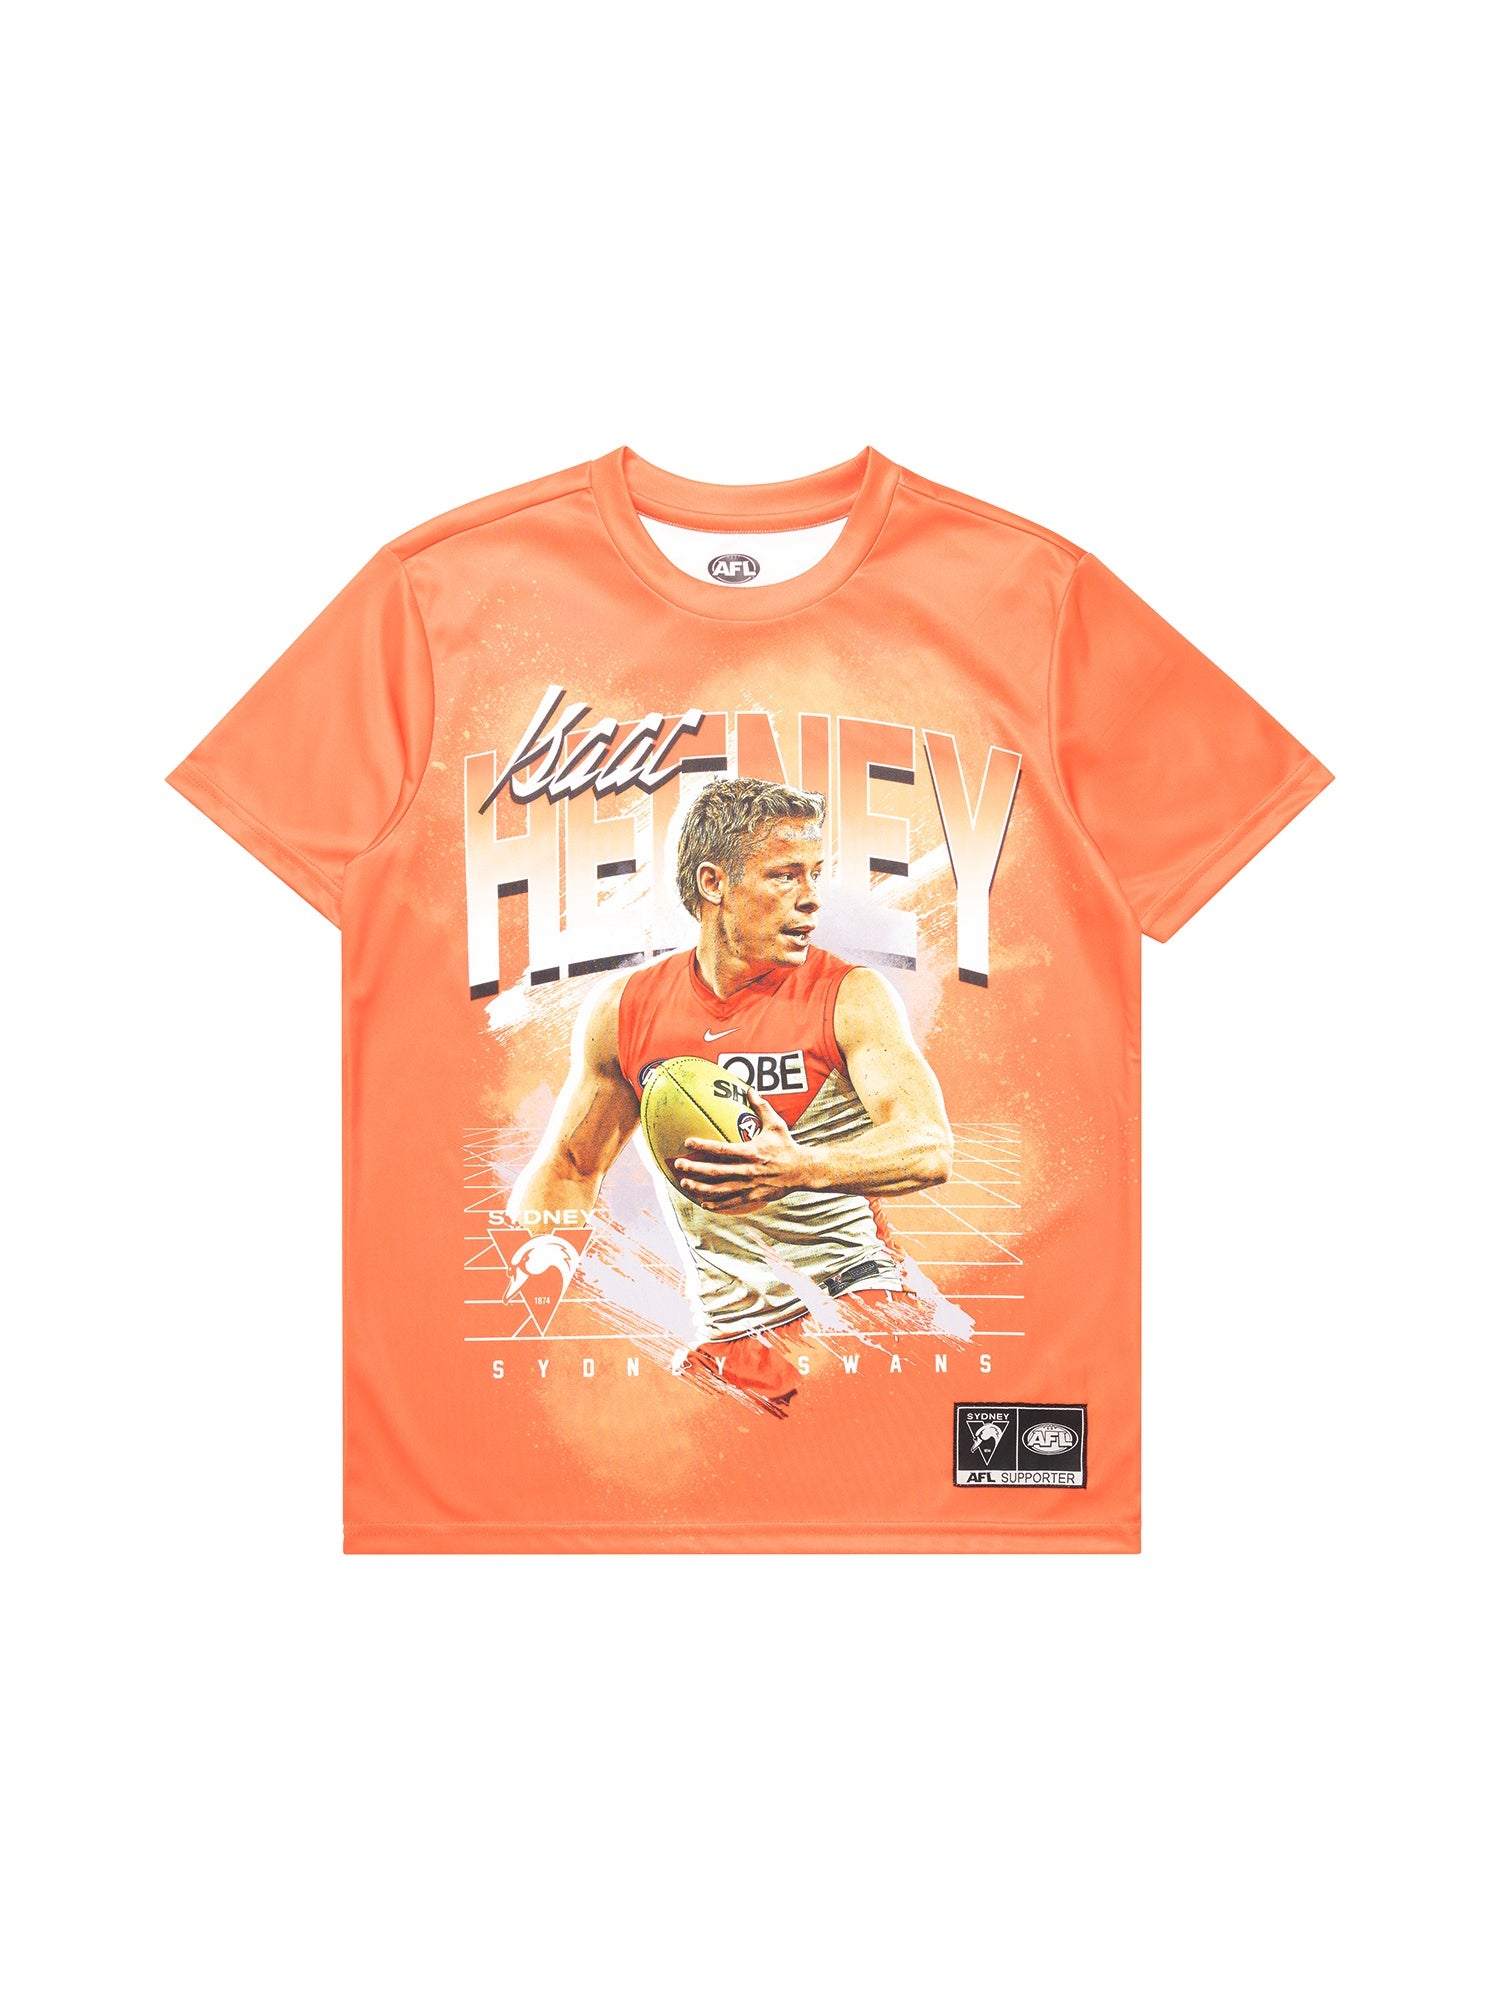 Sydney Swans Youth Player Tee - Isaac Heeney